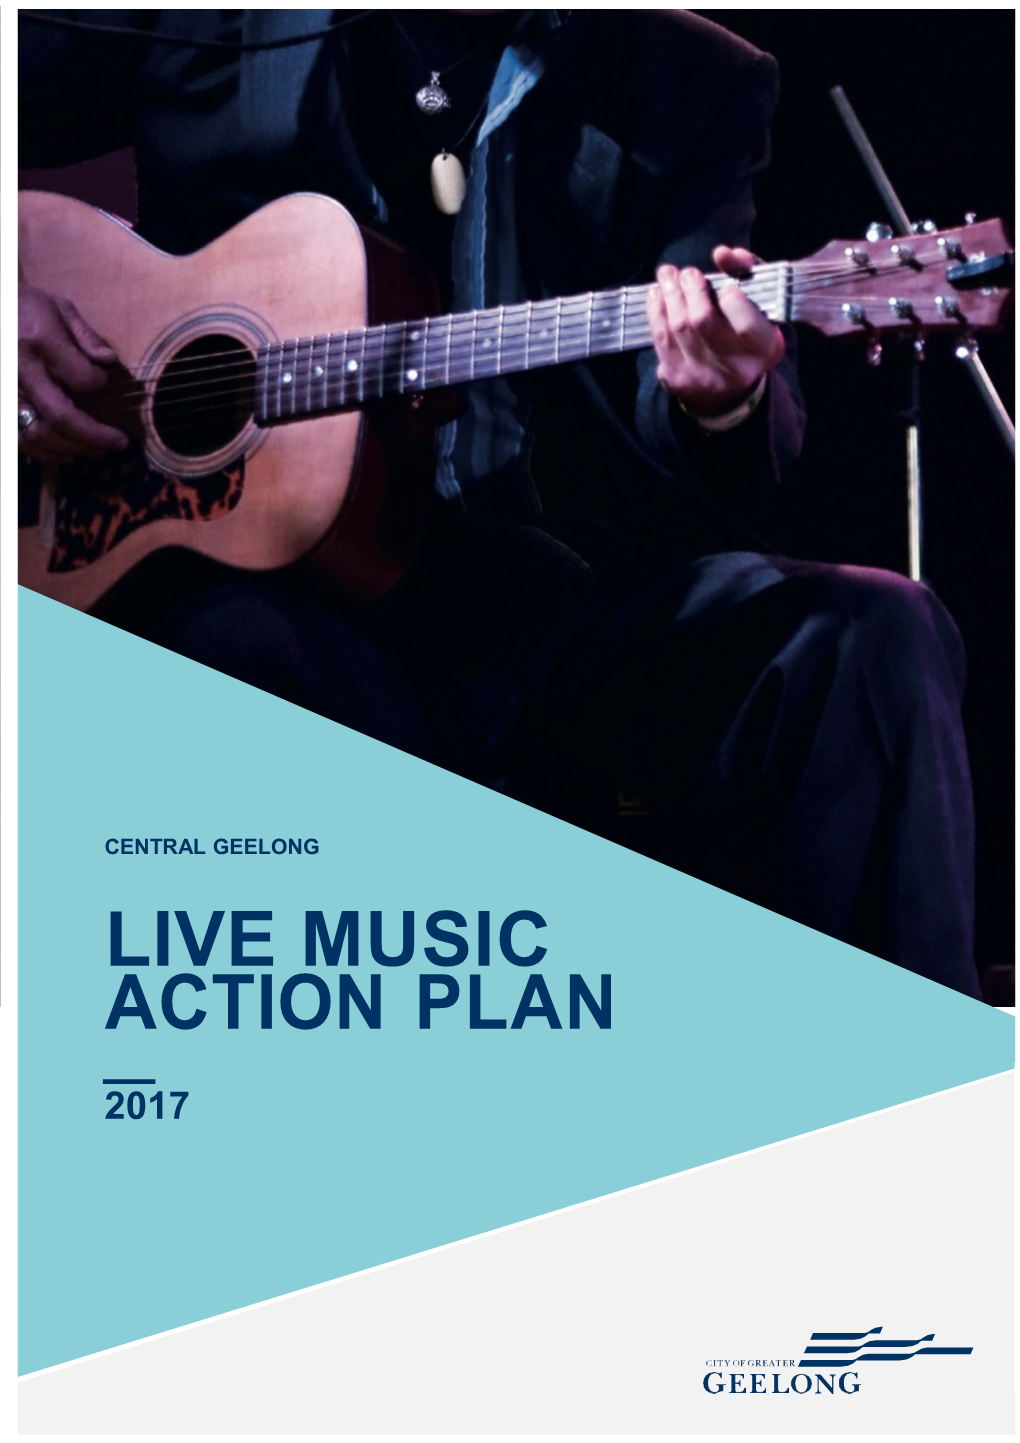 CENTRAL GEELONG LIVE MUSIC ACTION PLAN (Livemap)